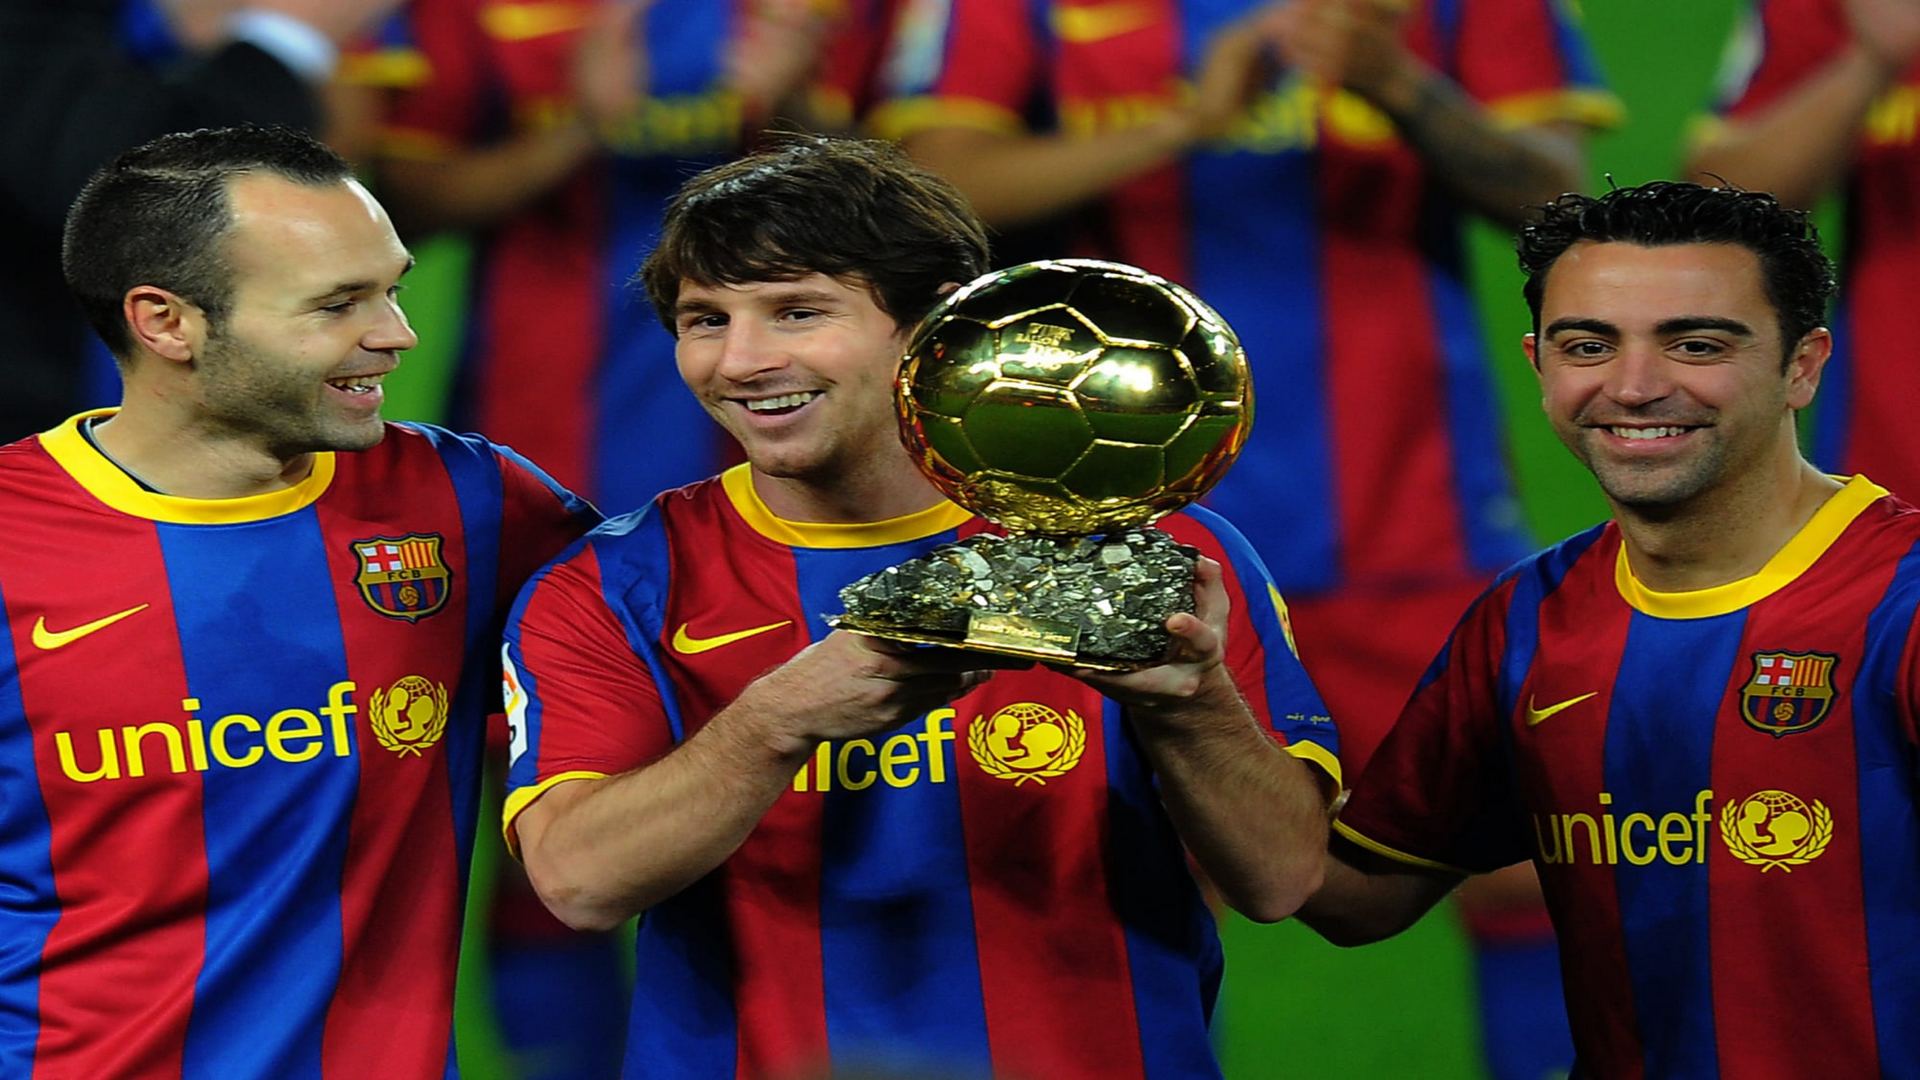 Jaw-dropping 10 best Barcelona Players of All time - Lionel Messi, Xavi, and Andres Iniesta